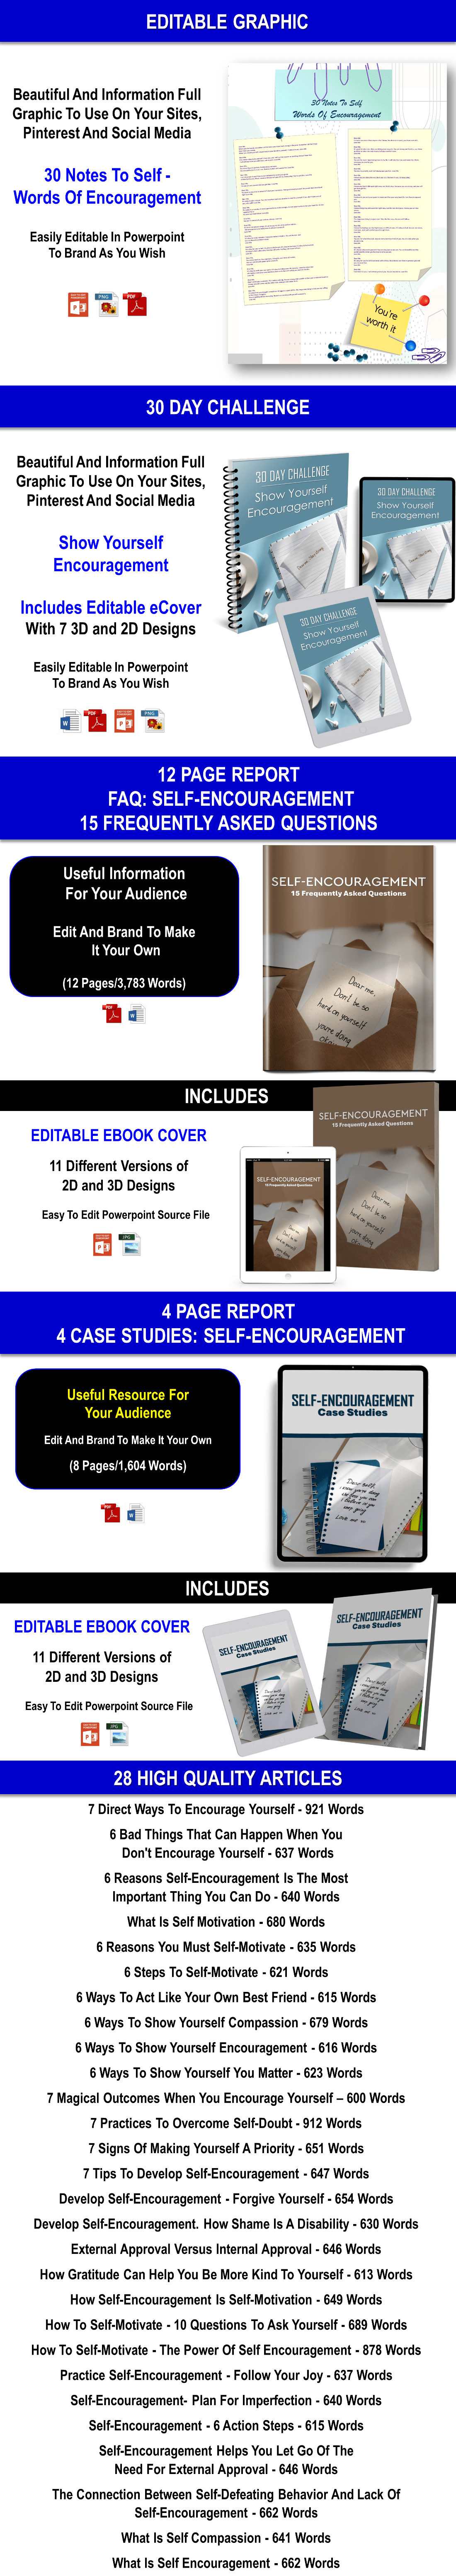 The Incredible Practice Of Self-Encouragement - 30 Notes To Self: Words Of Encouragement Content with PLR Rights